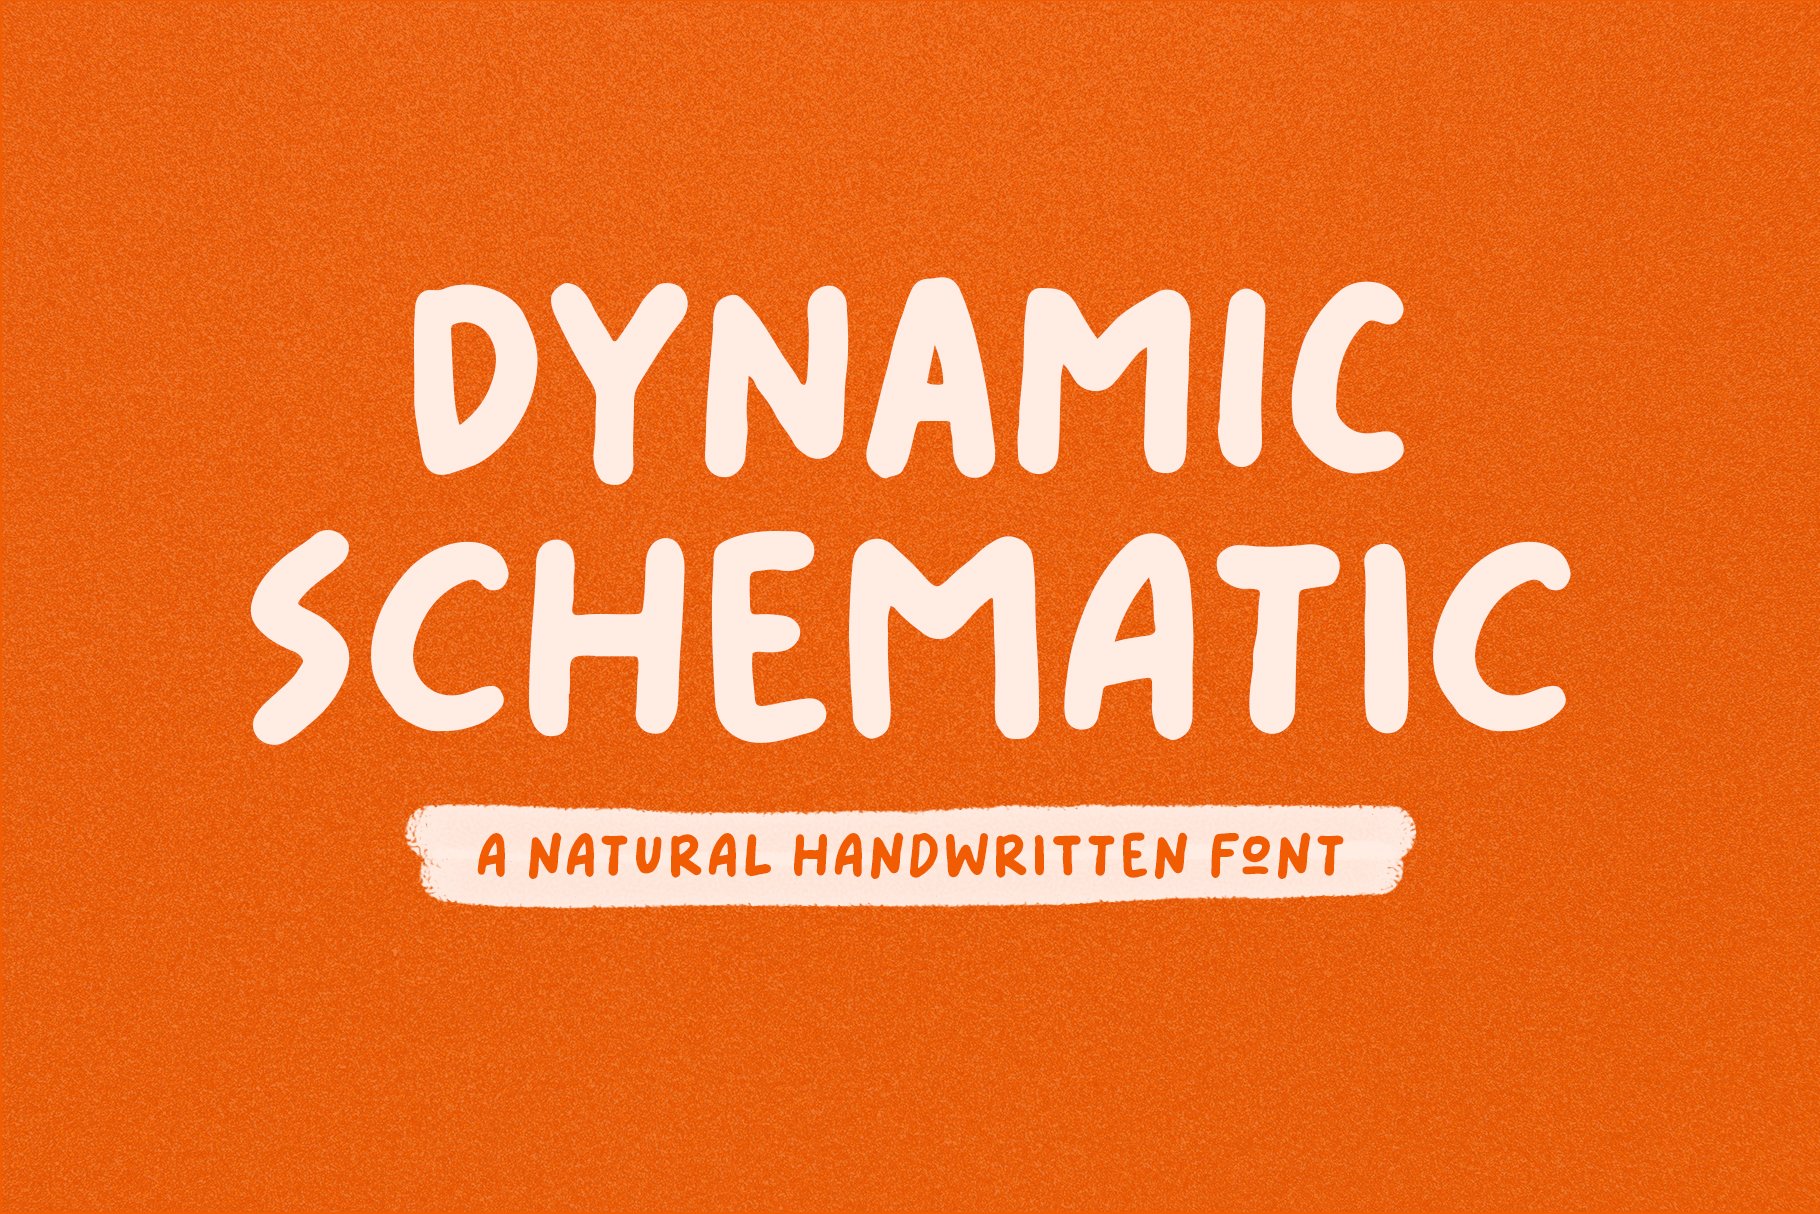 Dynamic Schematic Font cover image.